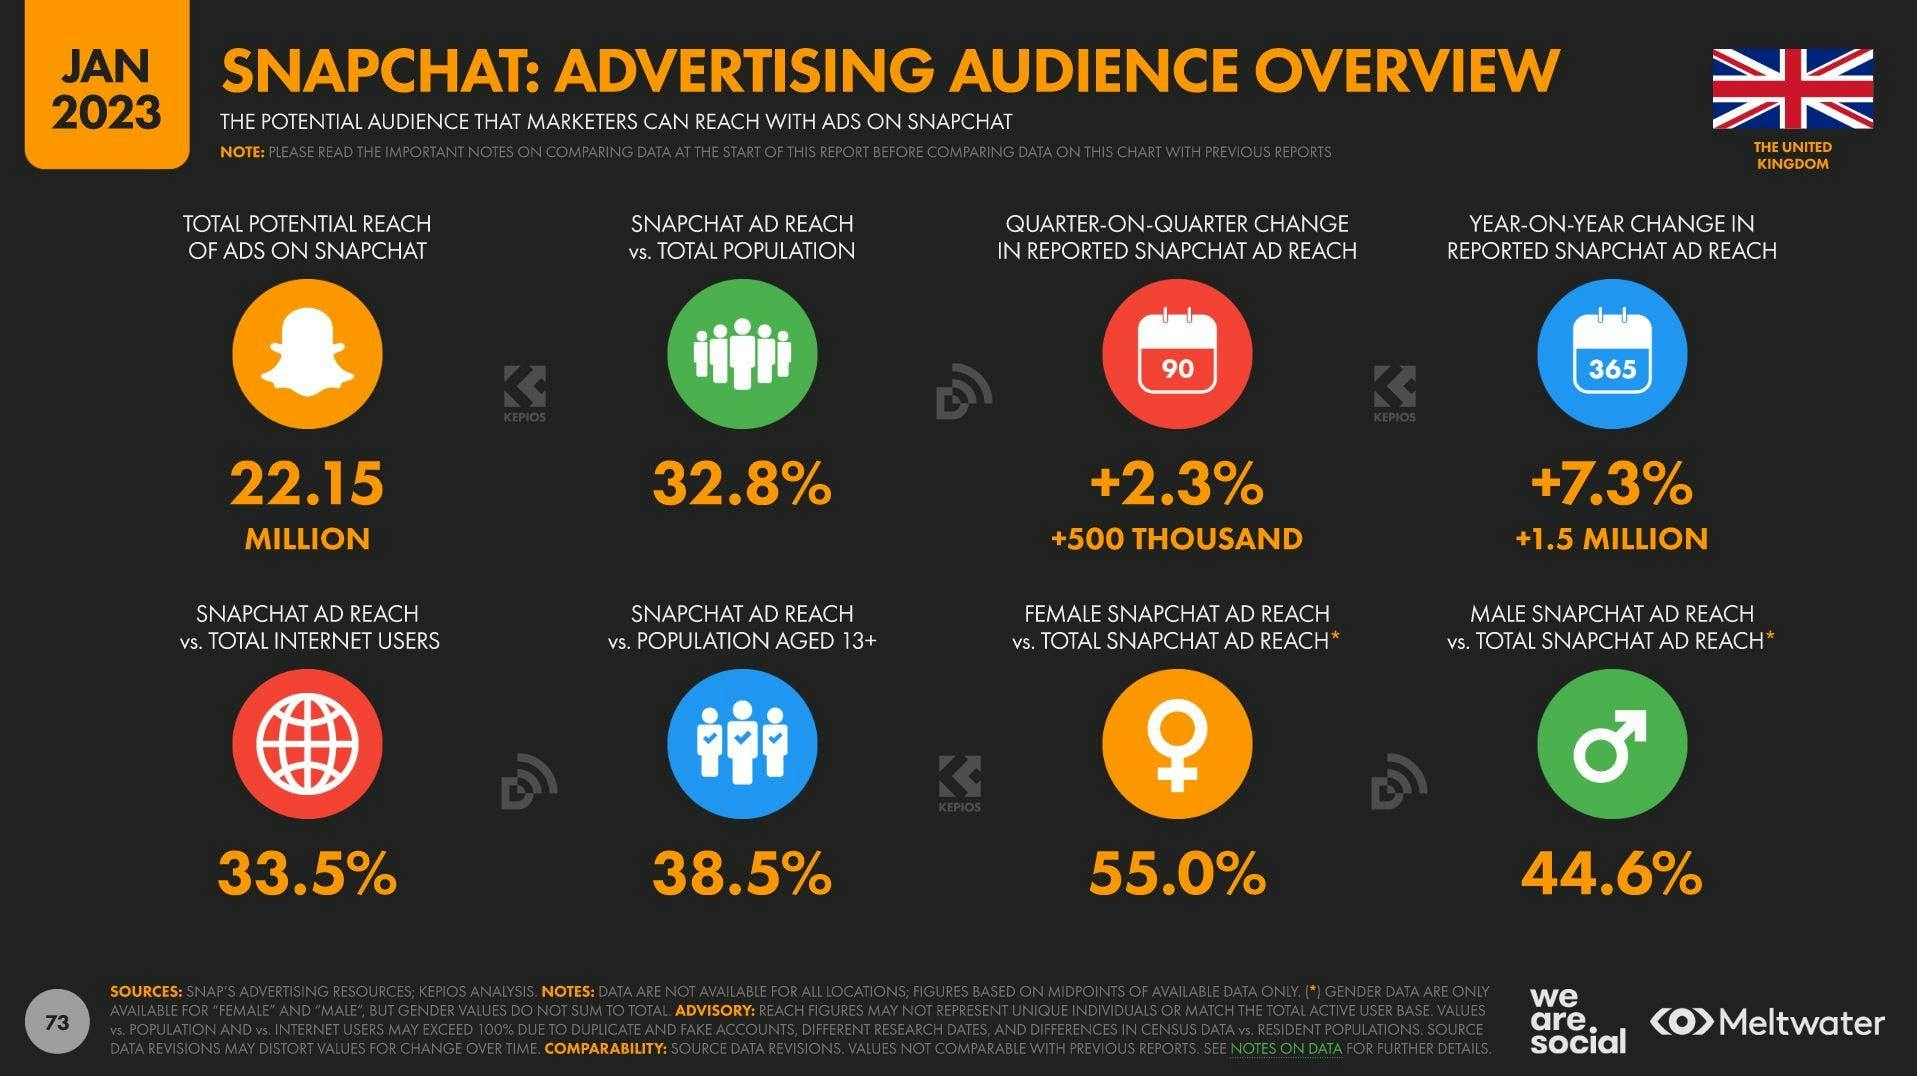 Snapchat advertising audience overview UK